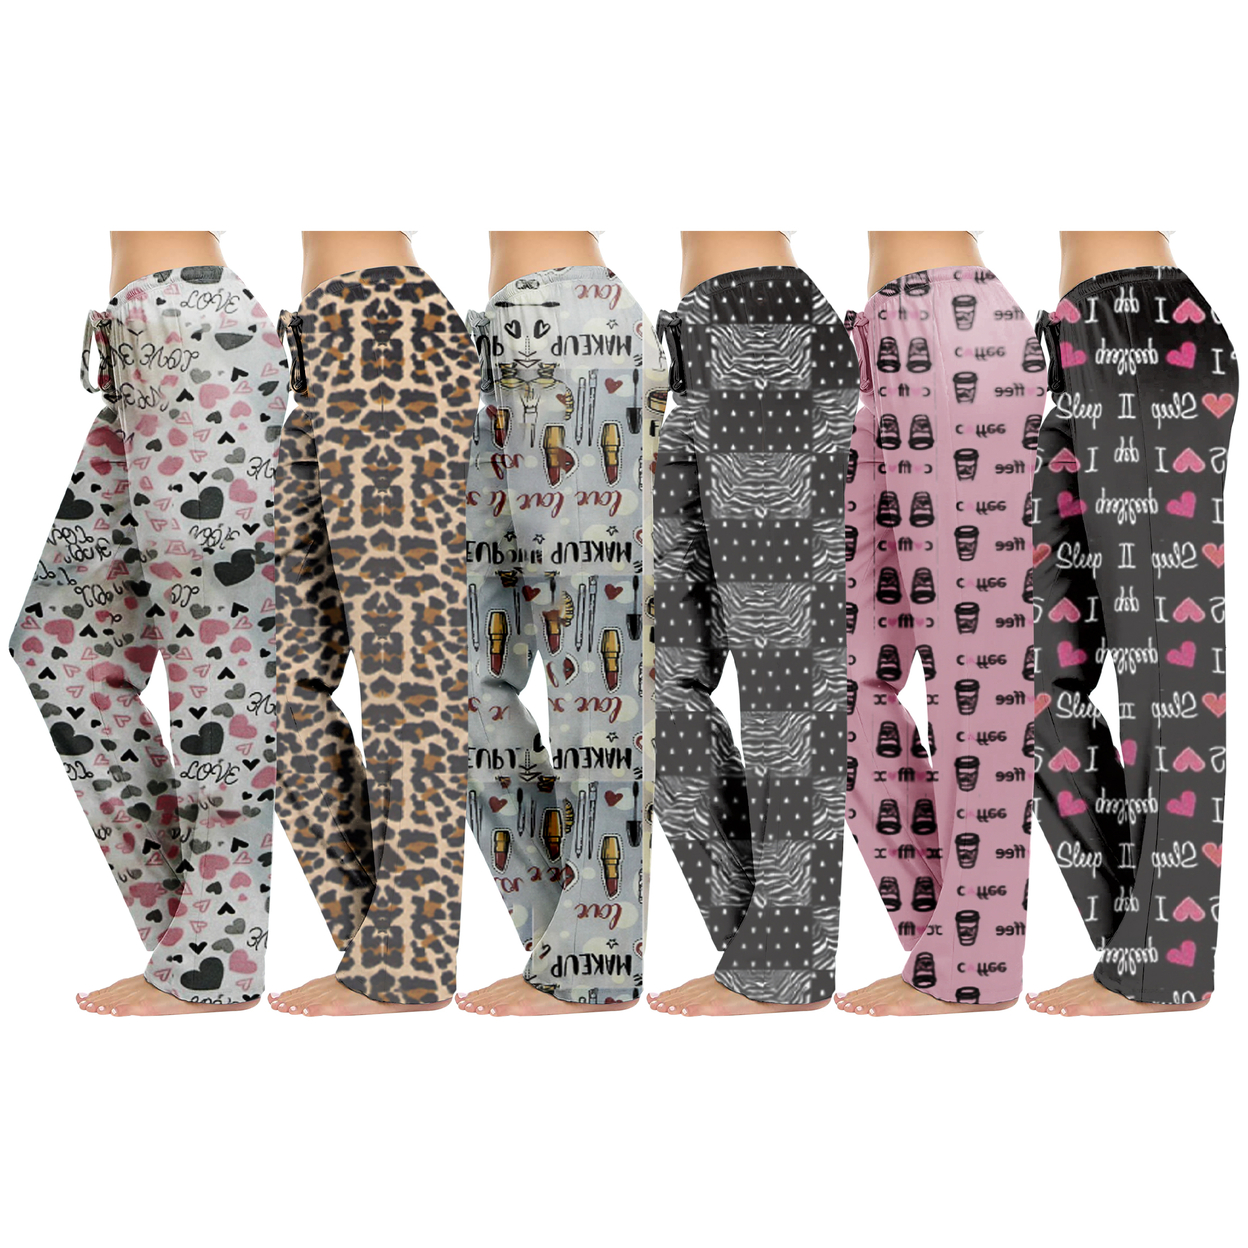 3-Pack: Women's Casual Fun Printed Lightweight Lounge Terry Knit Pajama Bottom Pants - Small, Shapes